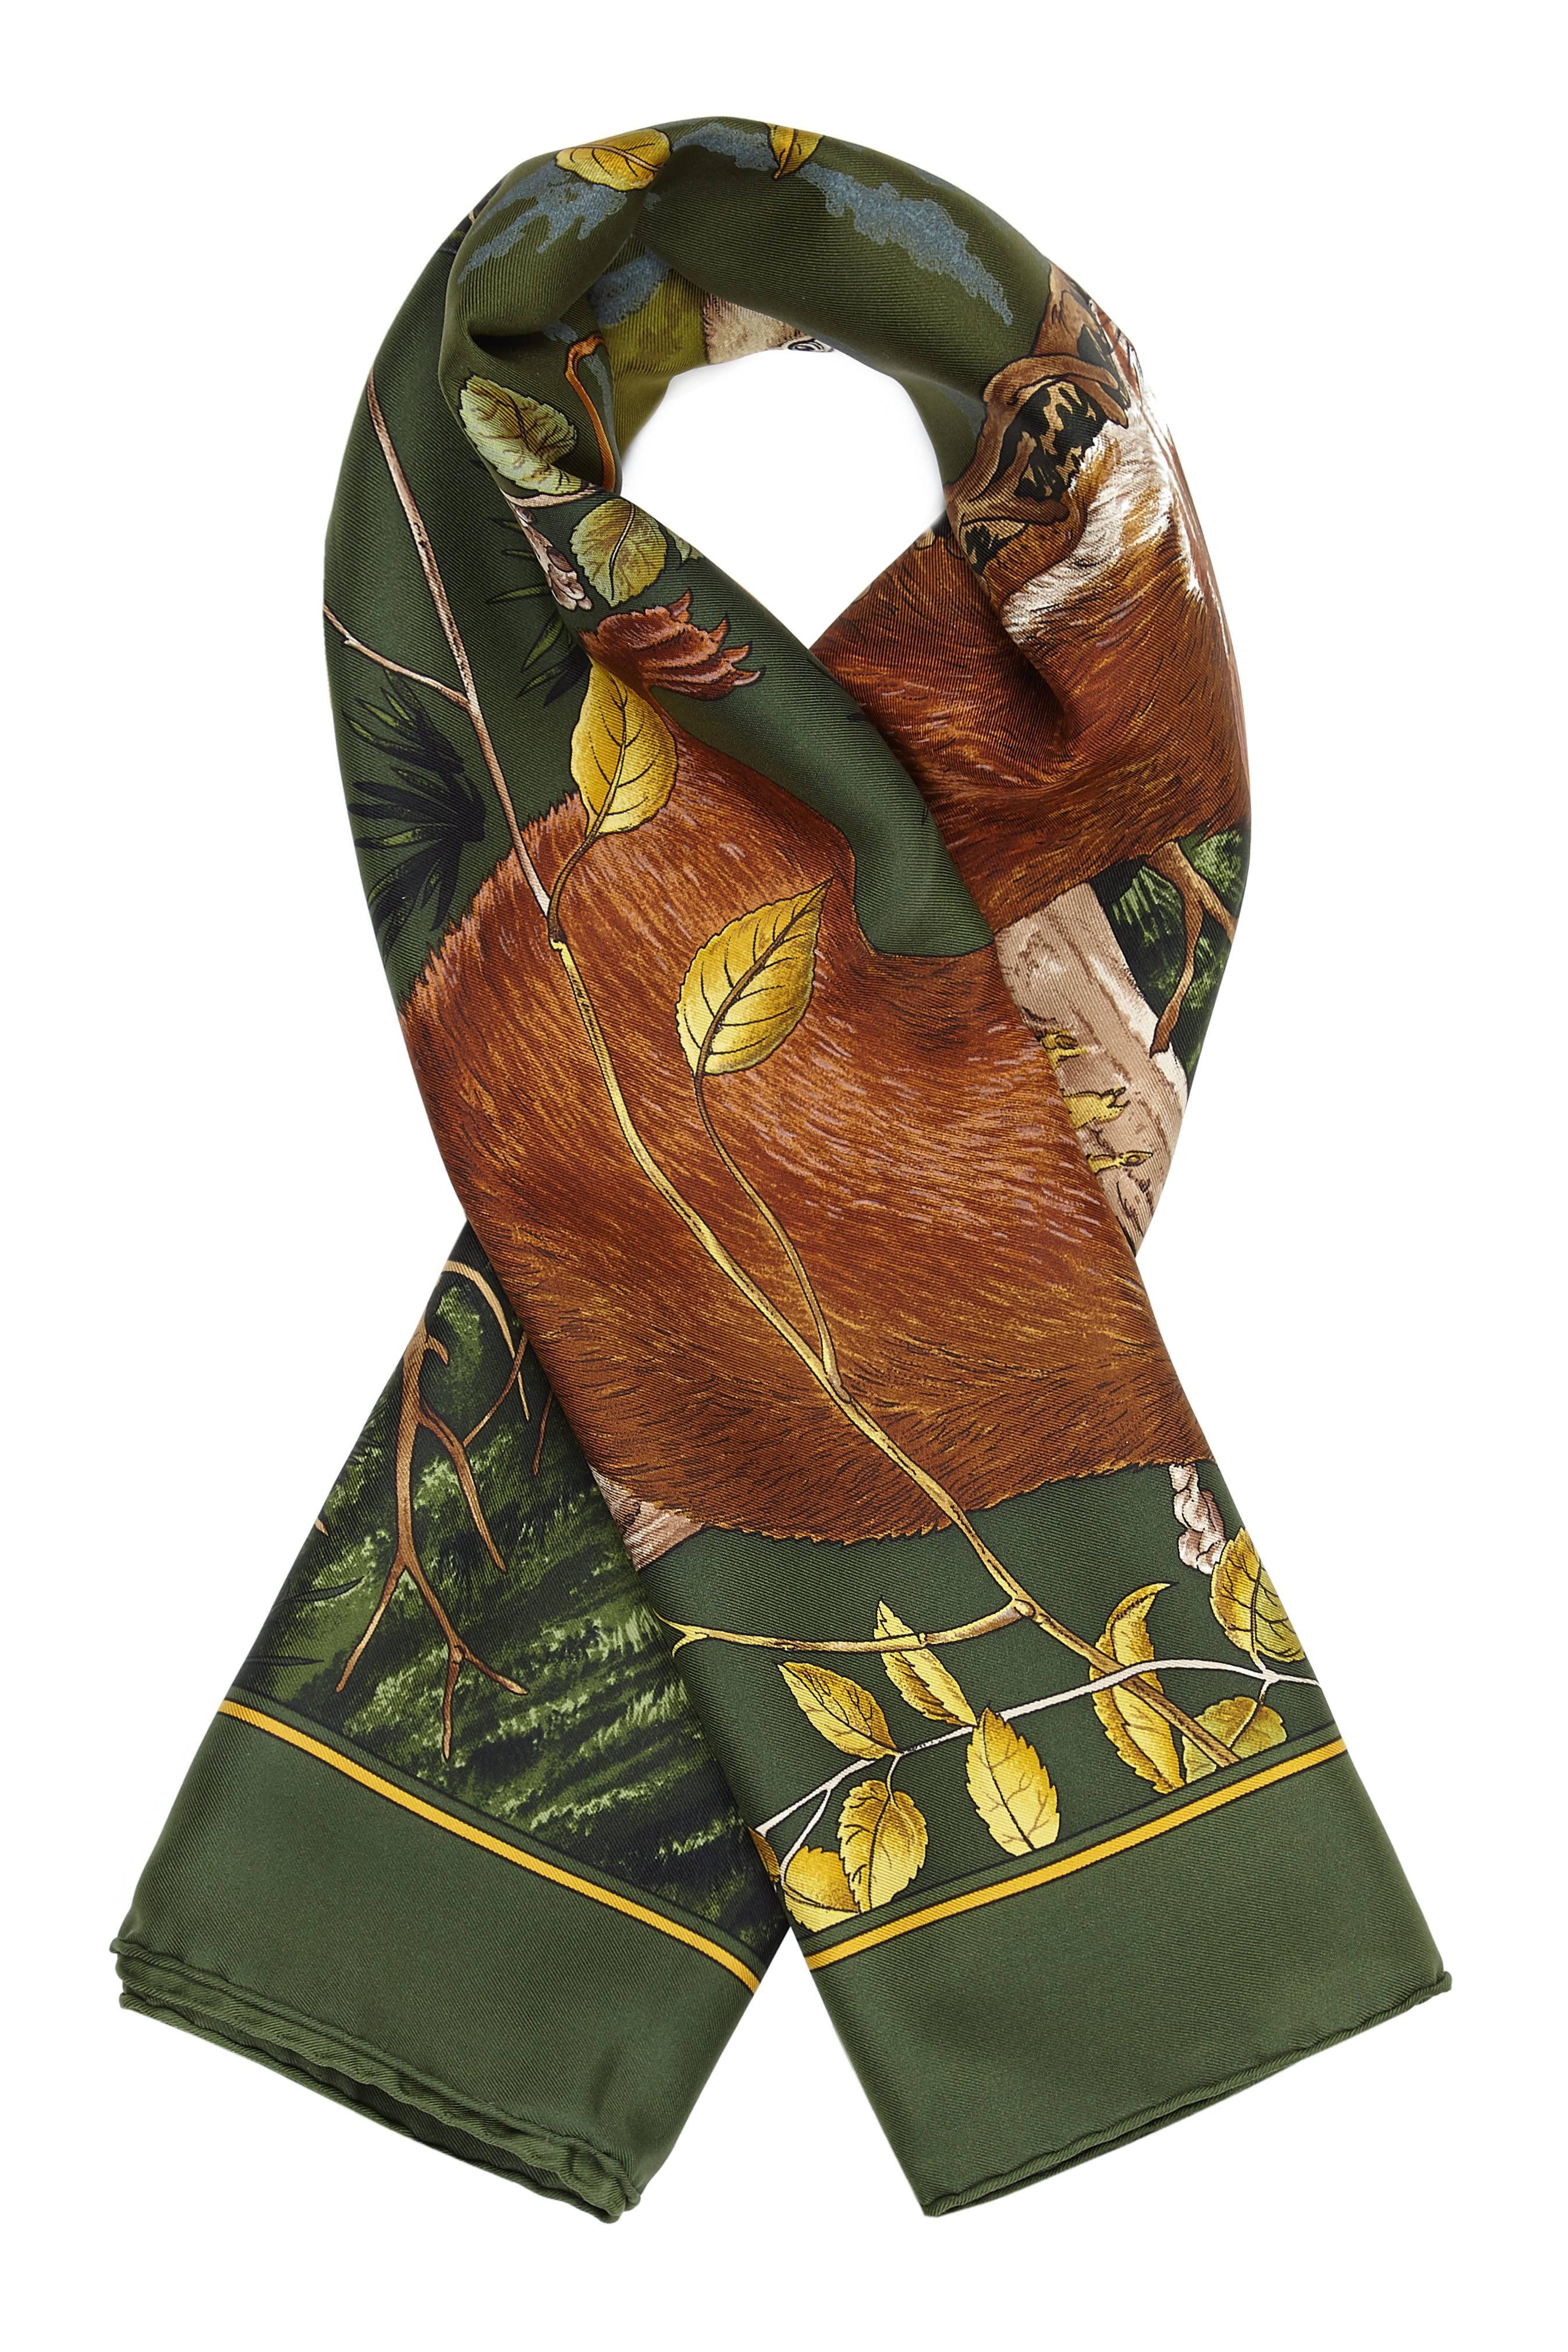 Chasse au Bois vintage Hermes silk twill scarf designed by Carl de Parcevaux literally translated as 'Hunting In The Woods' and features a lovely hunt themed design in green, brown and gold.  This is dated to 1995/6, the first and only issue of this